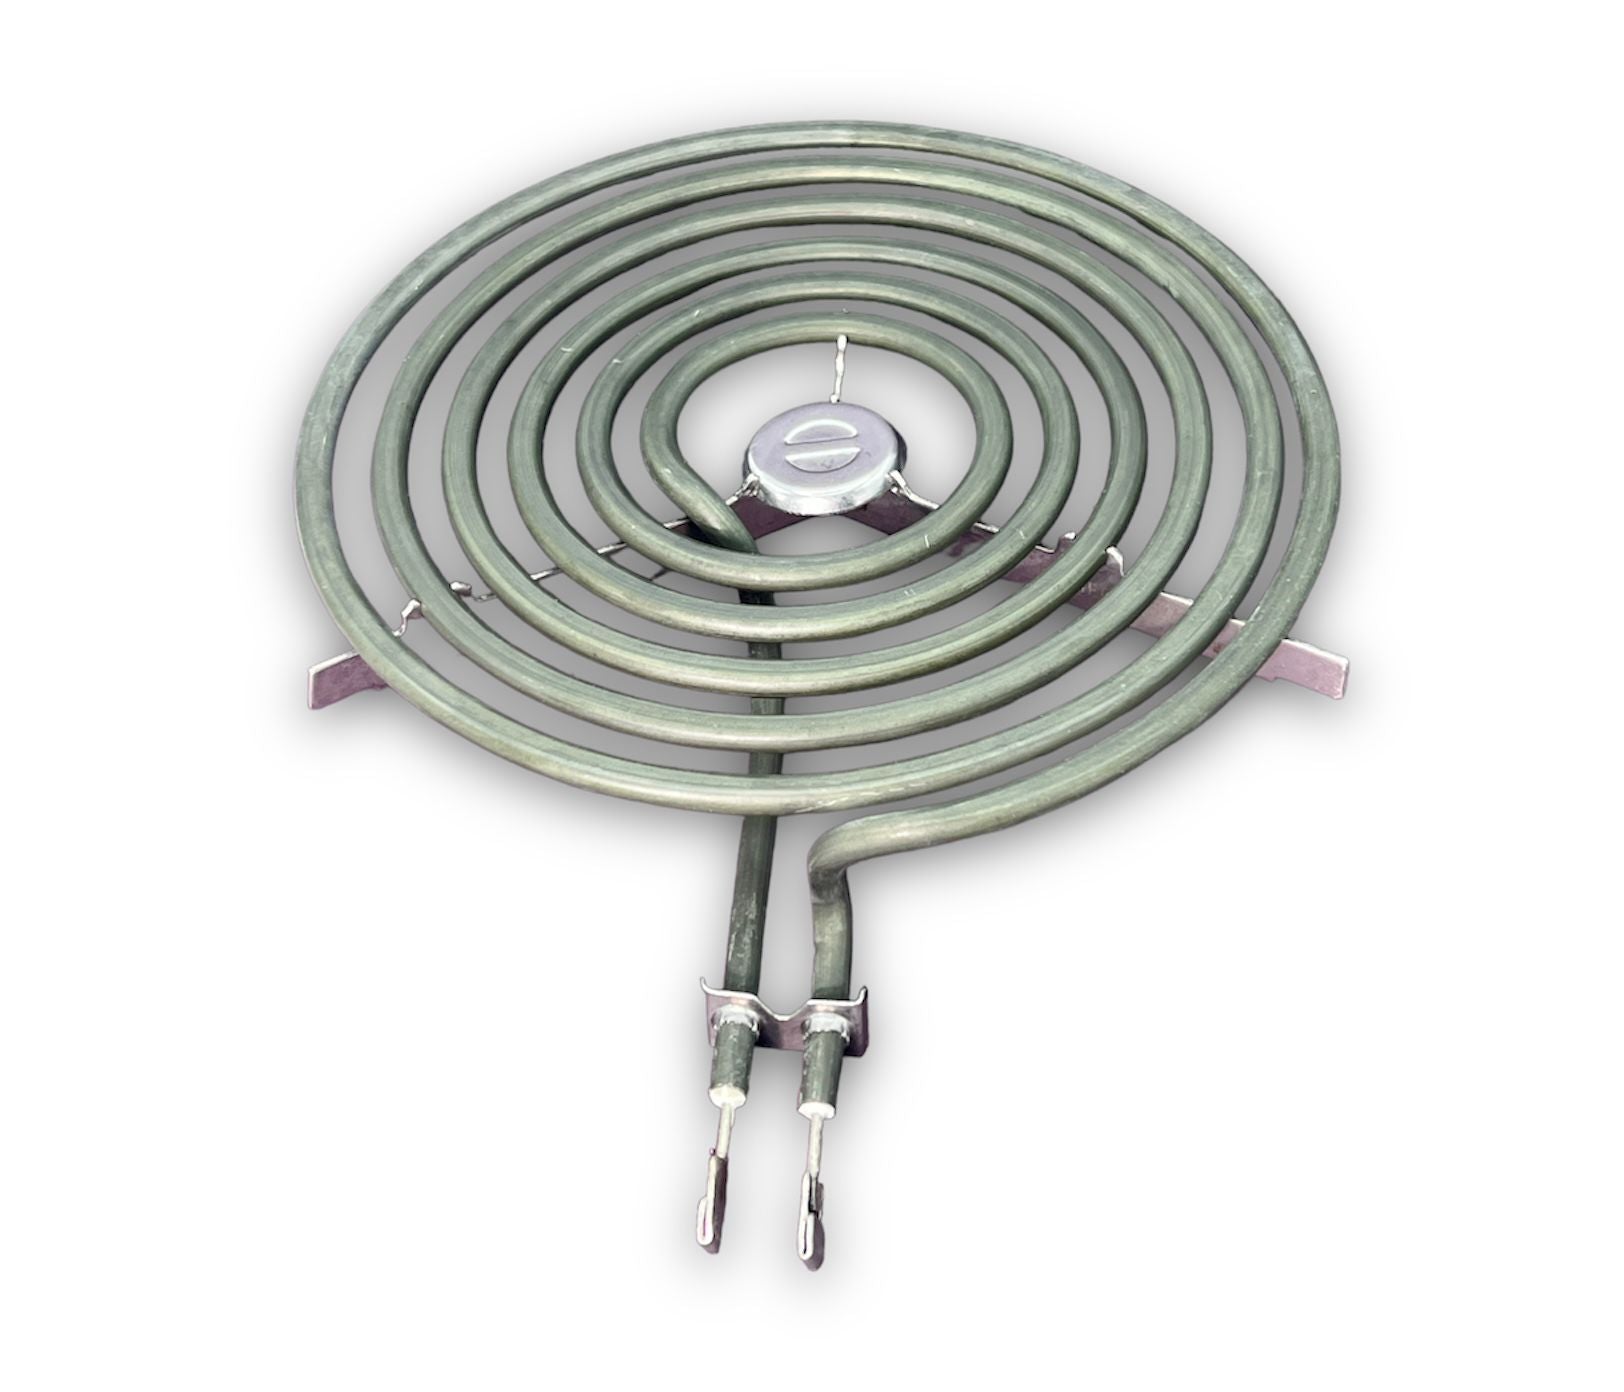 GE Range Coil Surface Burner 8"- WB30X0348,  Replaces: WB30X0214 WB30X0215 WB30X0324 WB30X0325 WB30X348 WB30X0367 WB30X214 WB30X215 WB30X324 WB30X325 WB30X348R WB30X367 WB30X5037 WB30X5038 WB30X5048 WB30X5049 INVERTEC